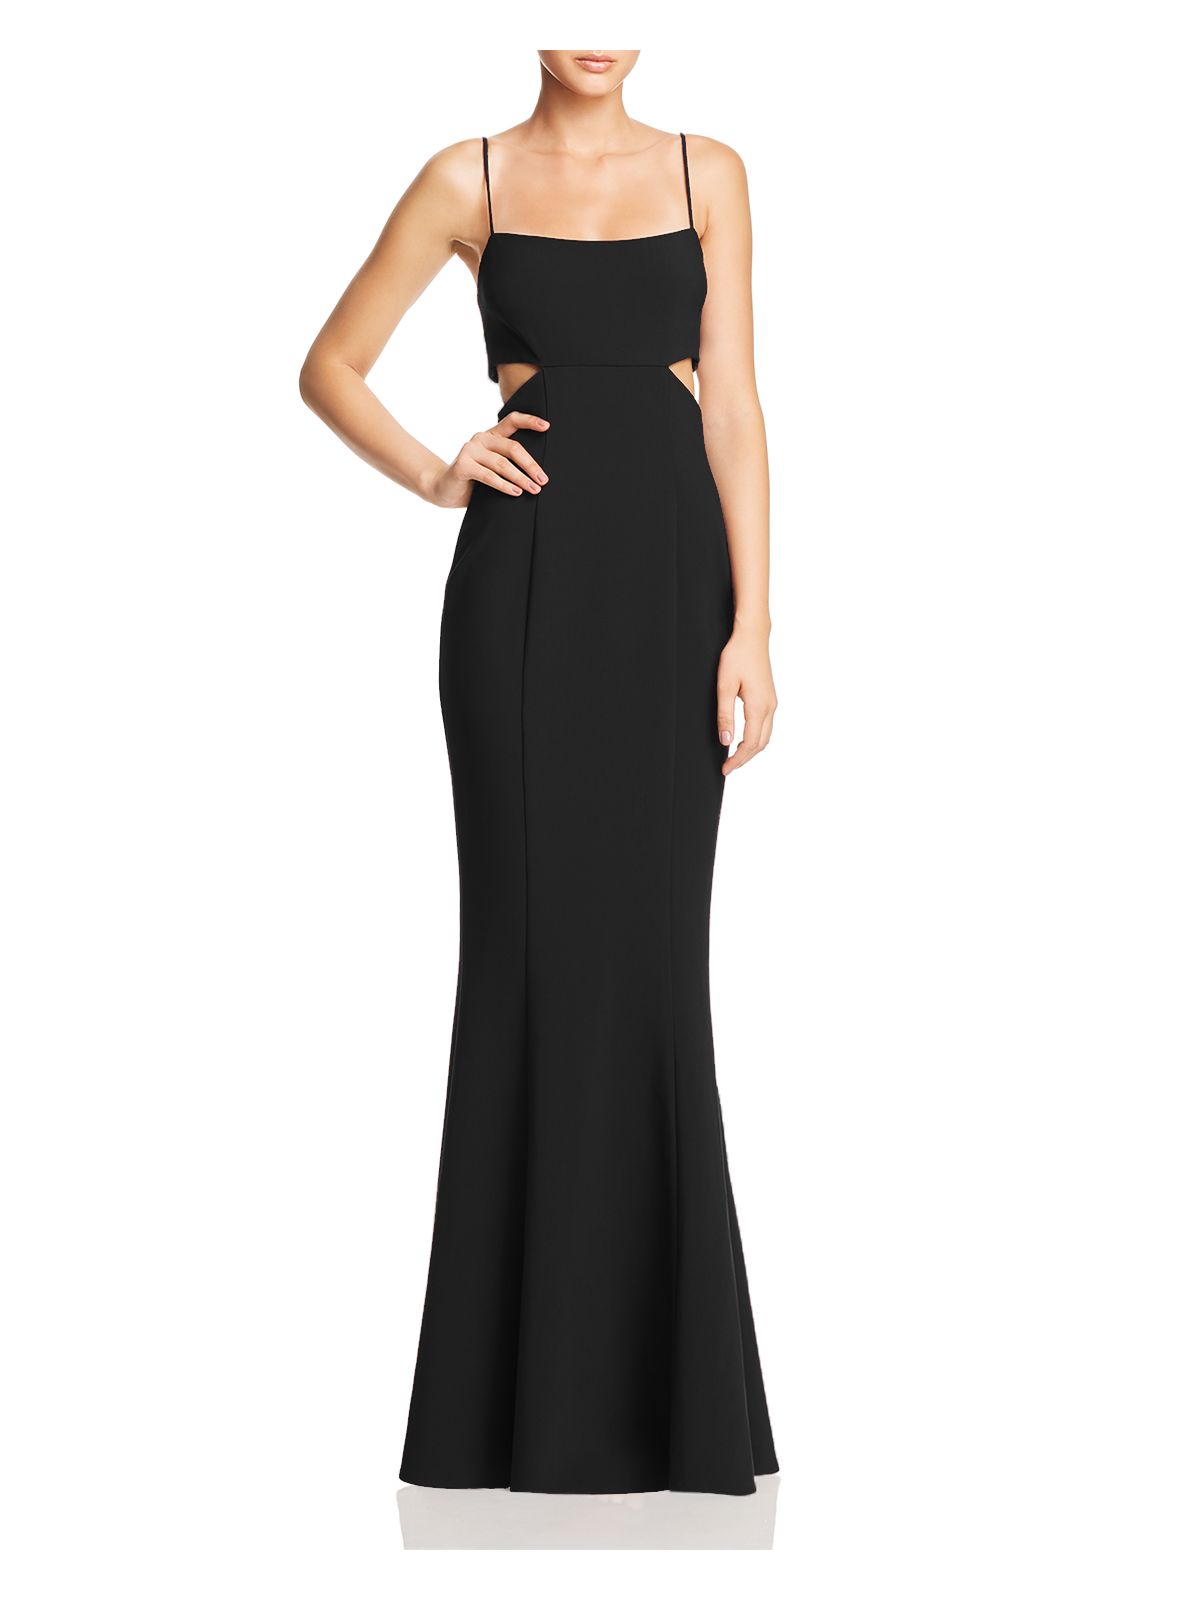 LIKELY Womens Black Cut Out Spaghetti Strap Square Neck Full-Length Formal Sheath Dress 6